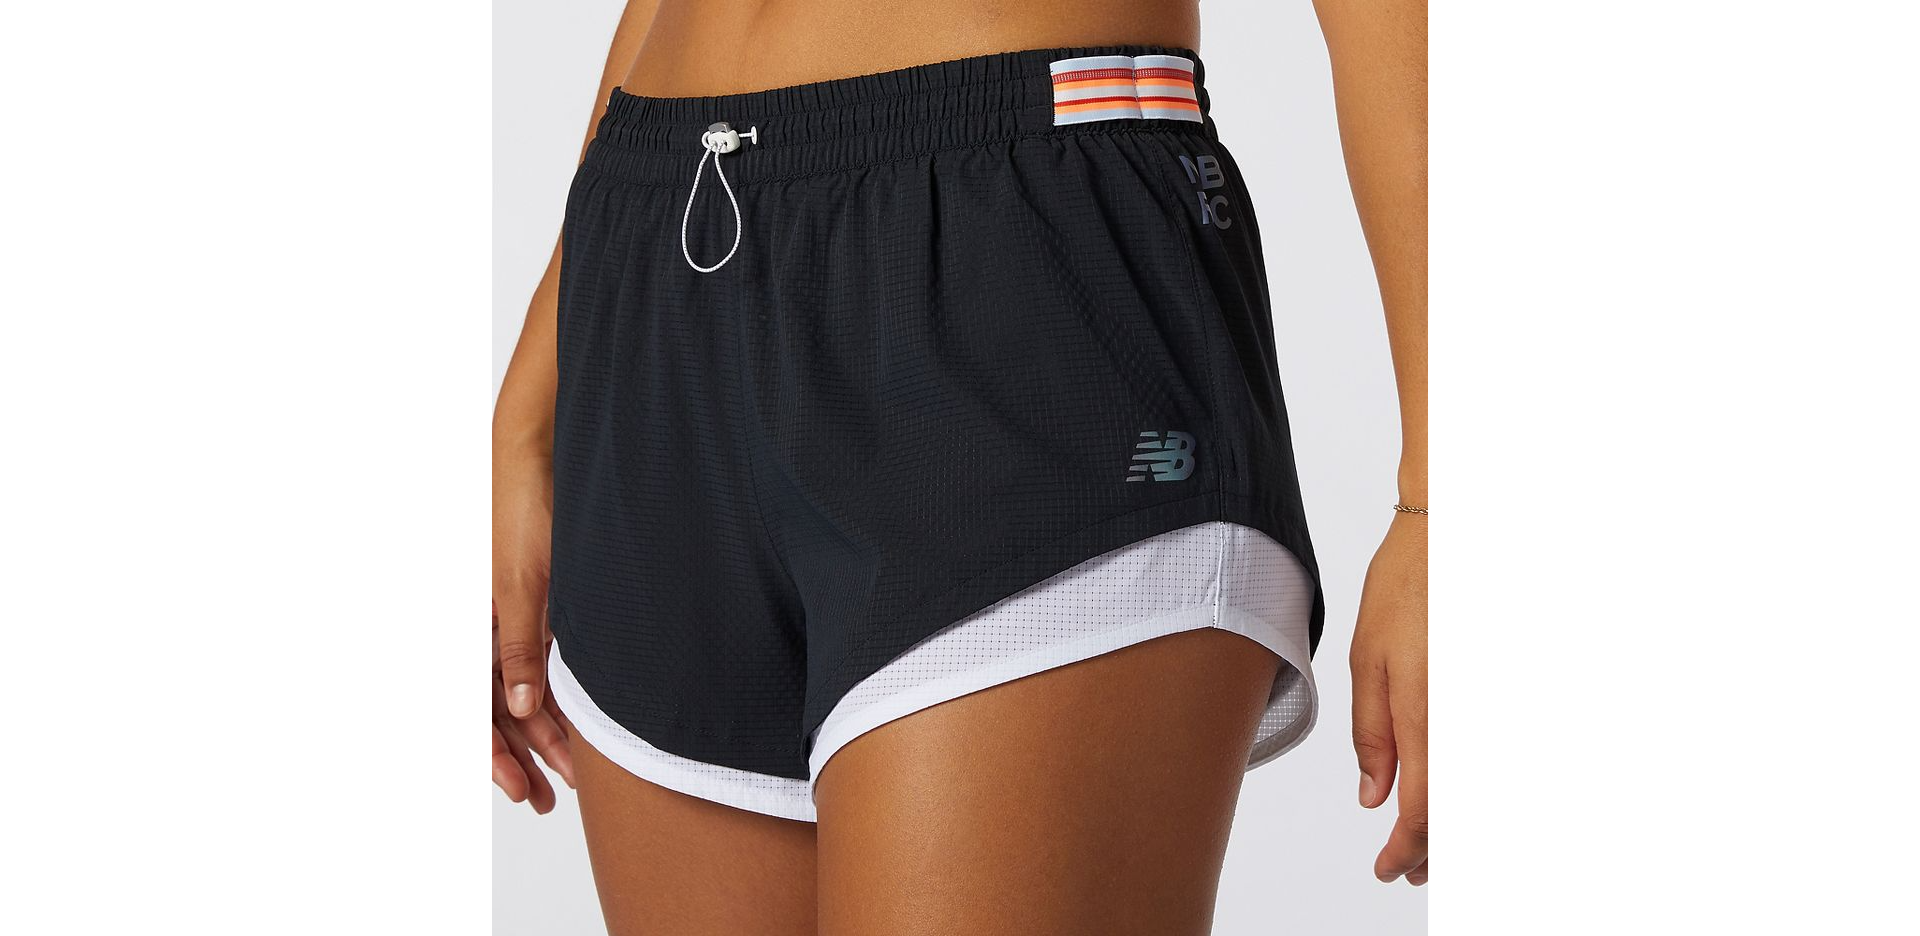 Best Offers on Running shorts upto 20-71% off - Limited period